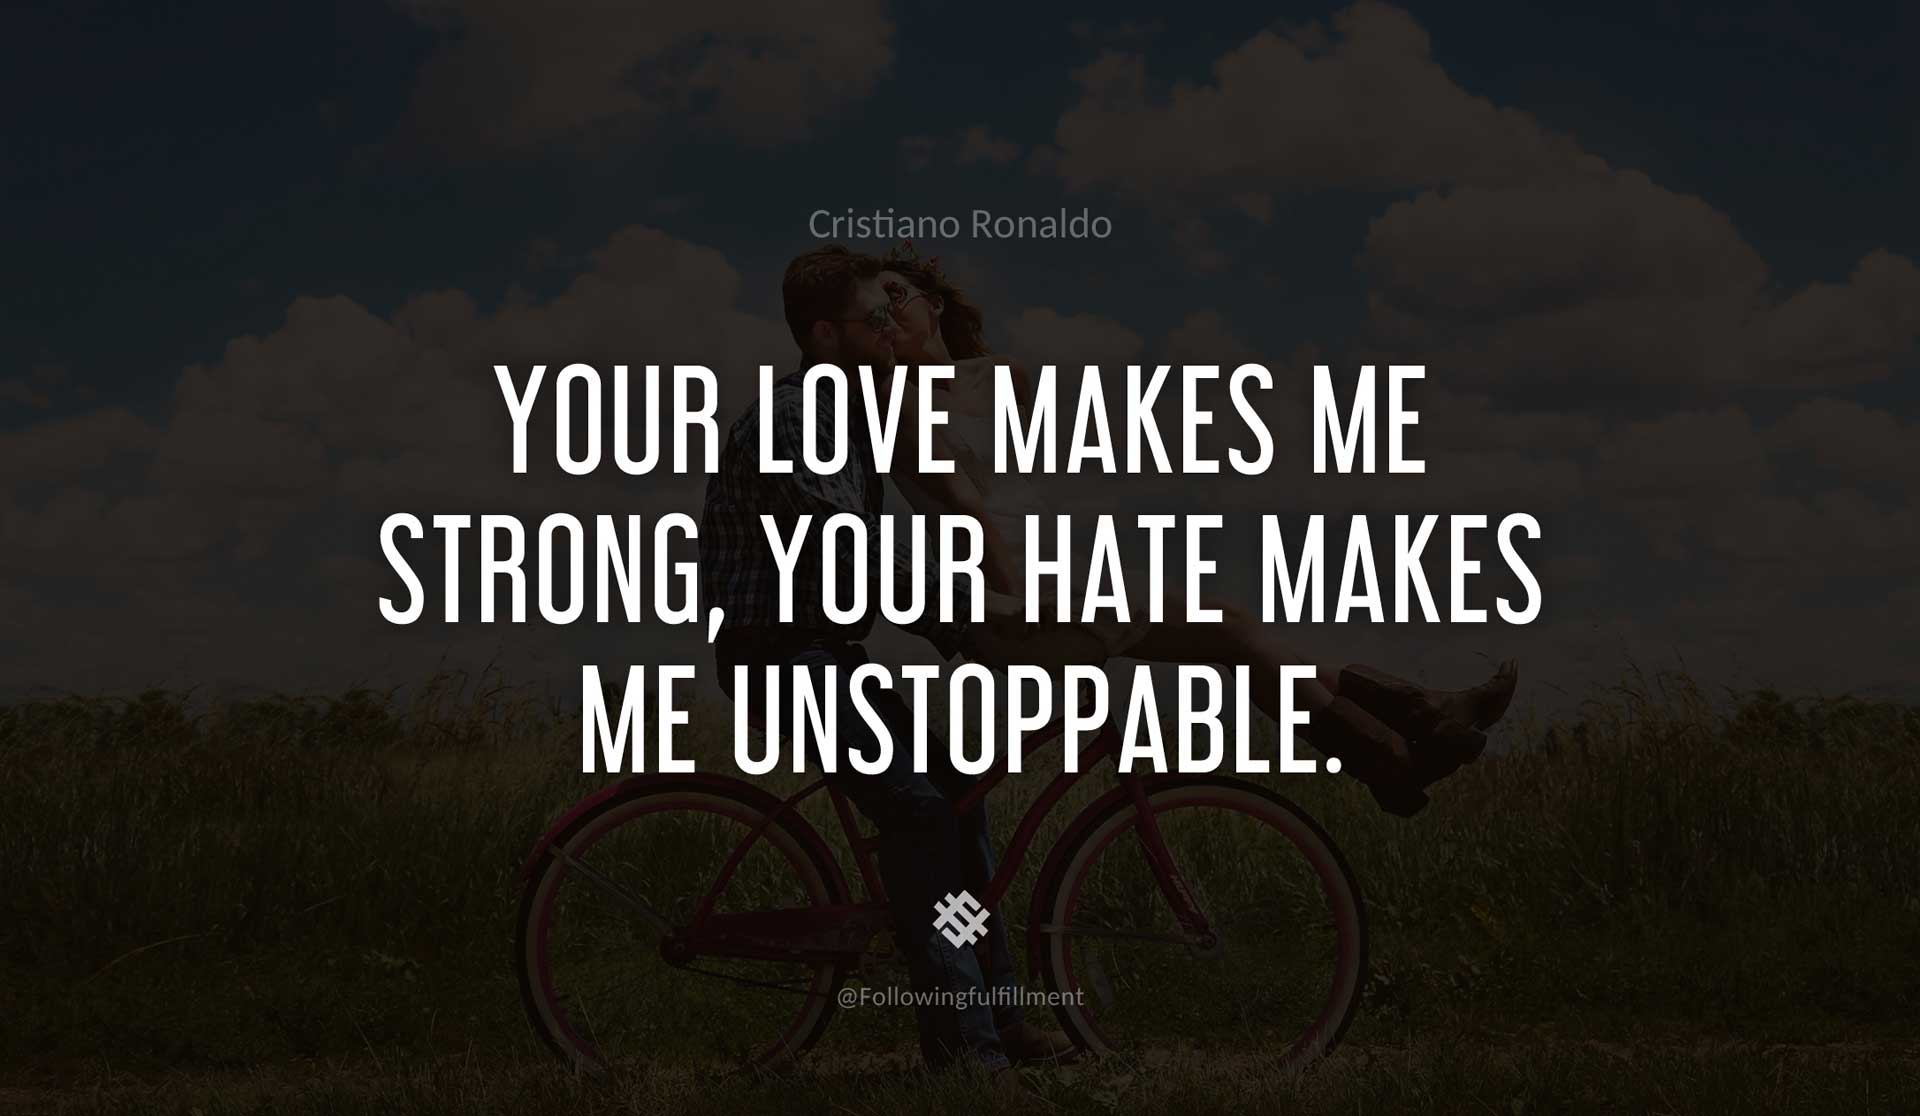 Your-love-makes-me-strong,-your-hate-makes-me-unstoppable.-CRISTIANO-RONALDO-Quote.jpg